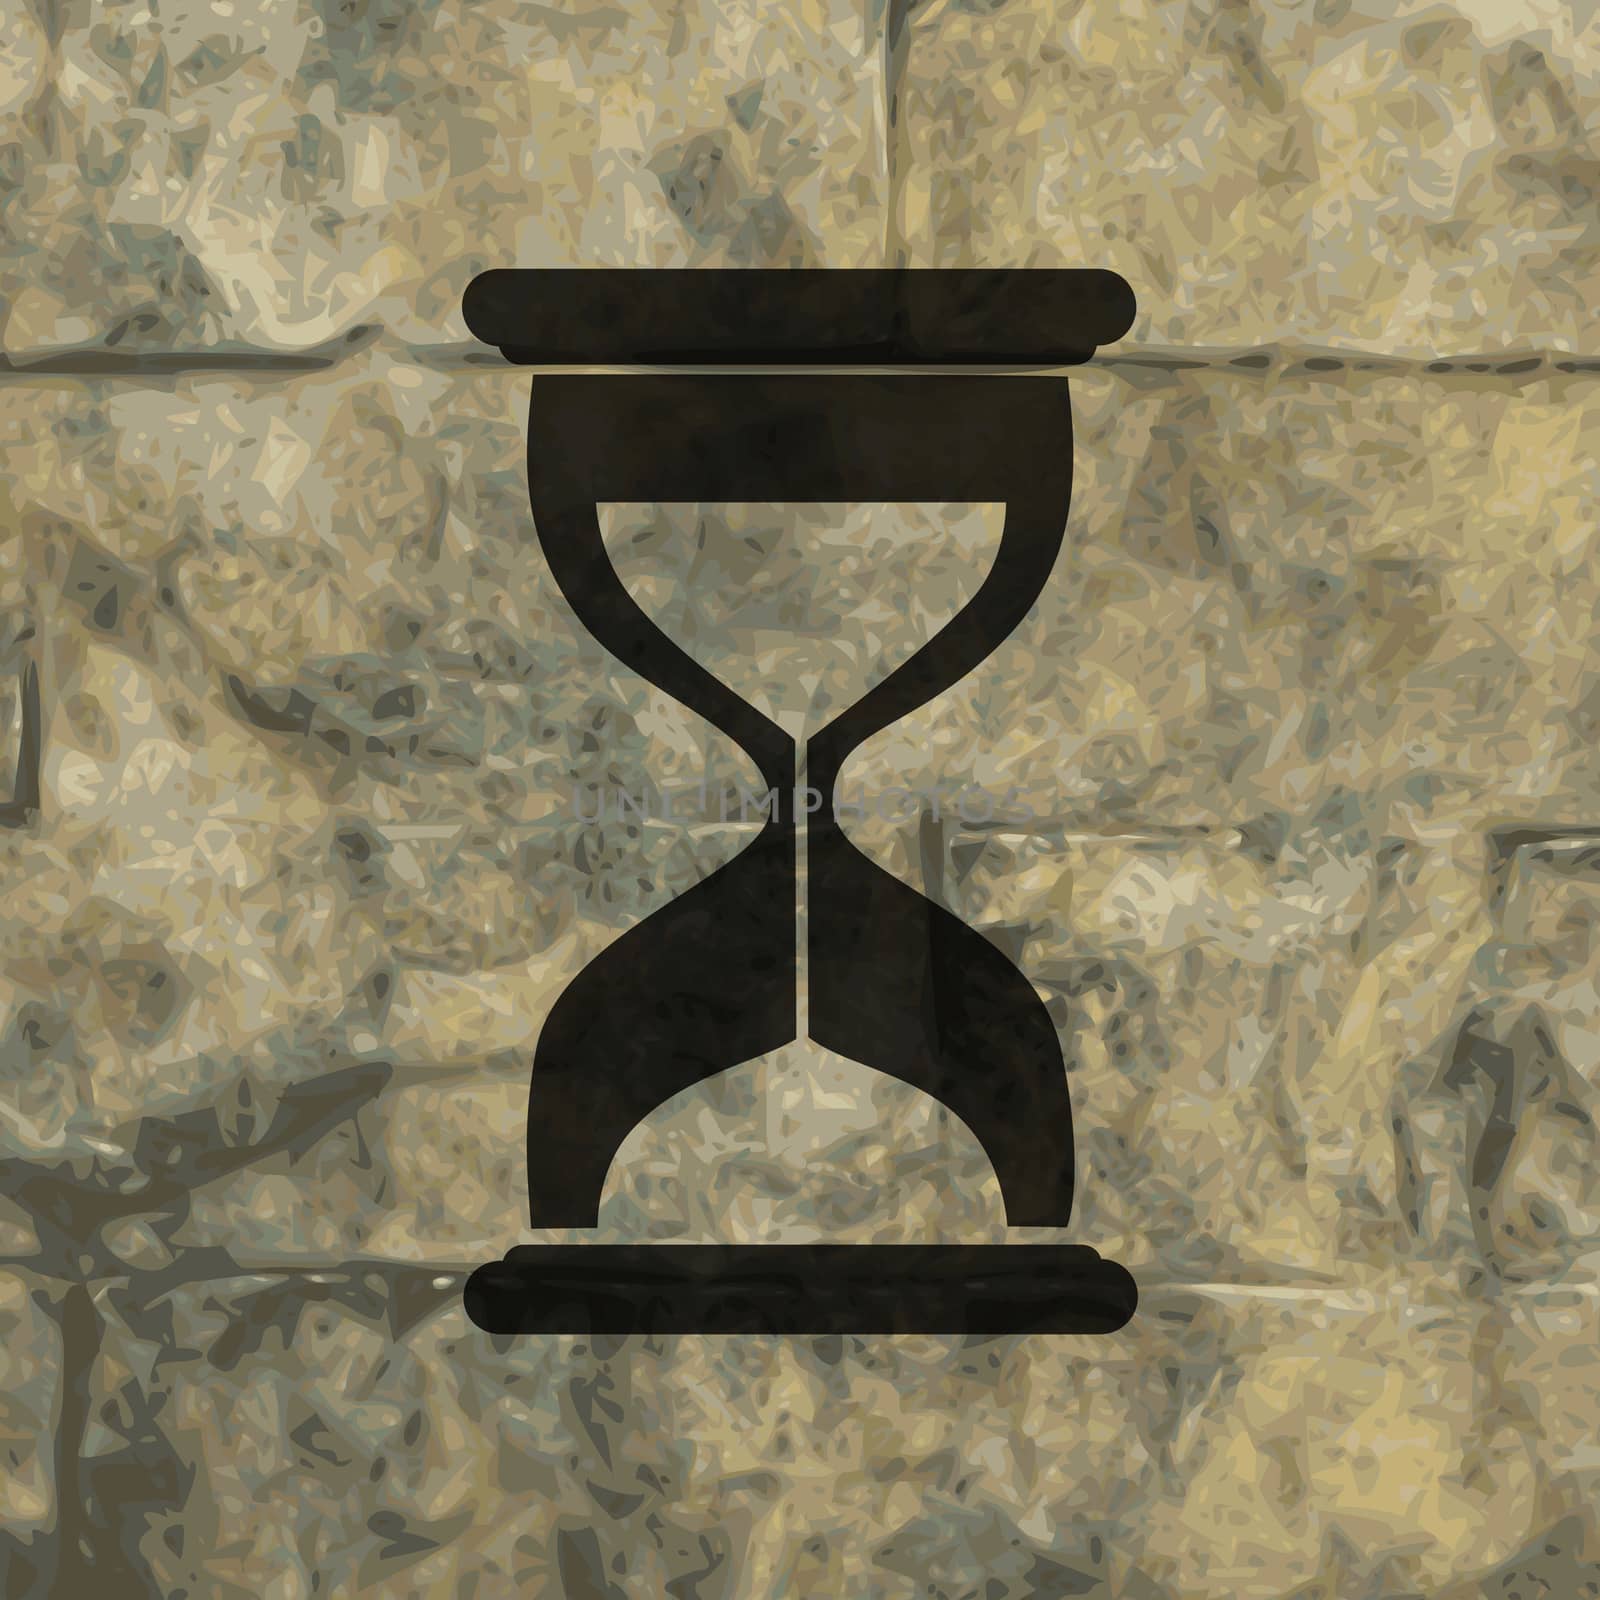 Hourglass time icon flat design with abstract background.